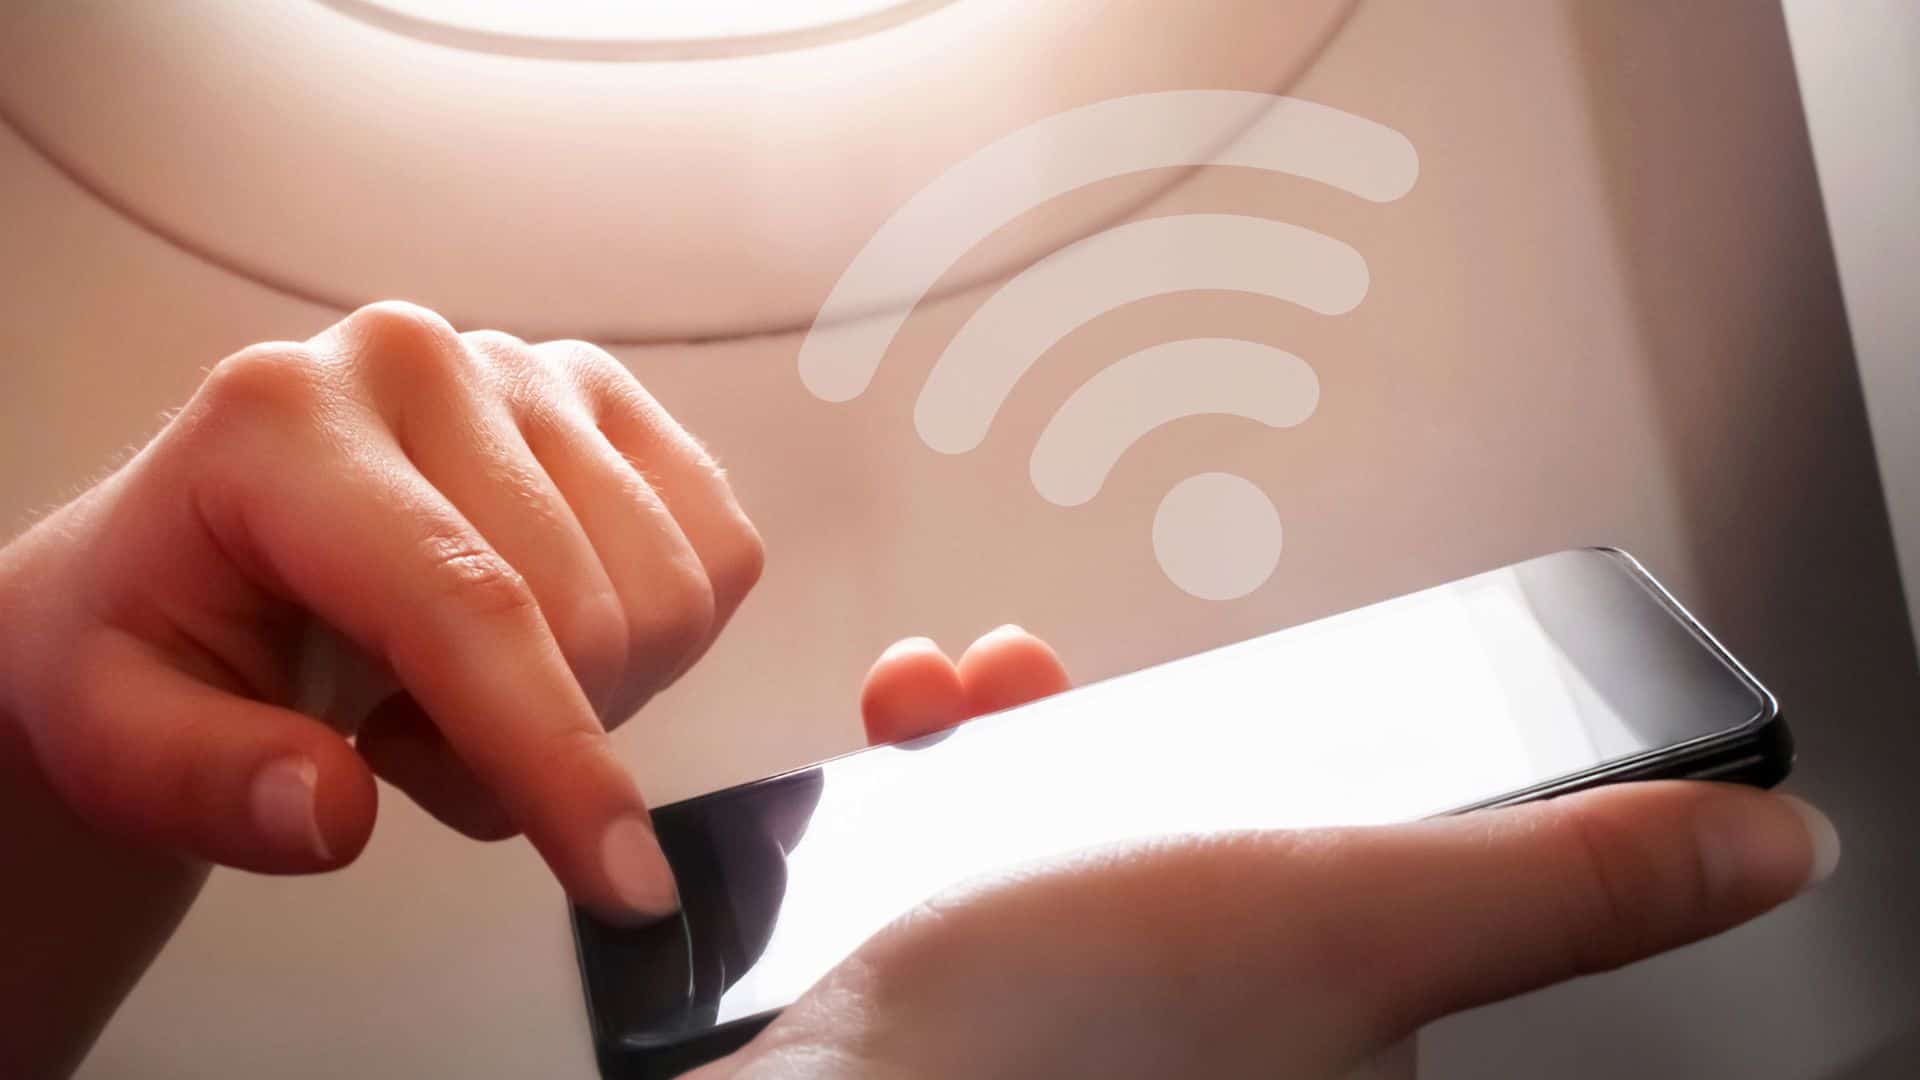 Can you use data on a plane